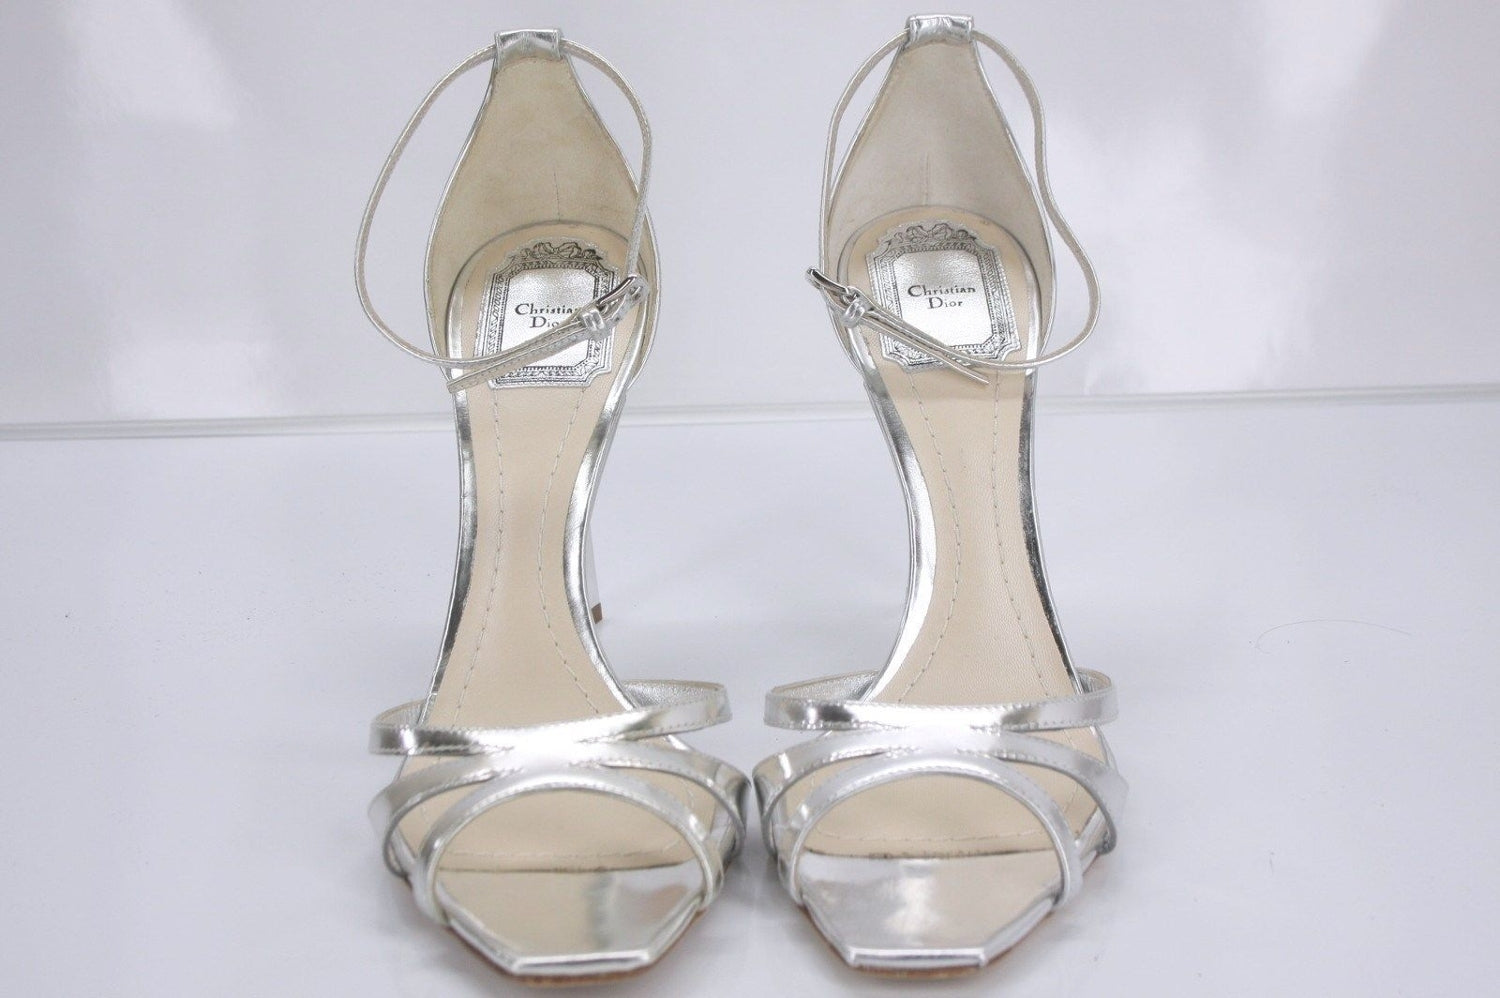 Christian Dior Silver Metallic Leather Ankle Strap Criss Sandals Size 39.5 $810